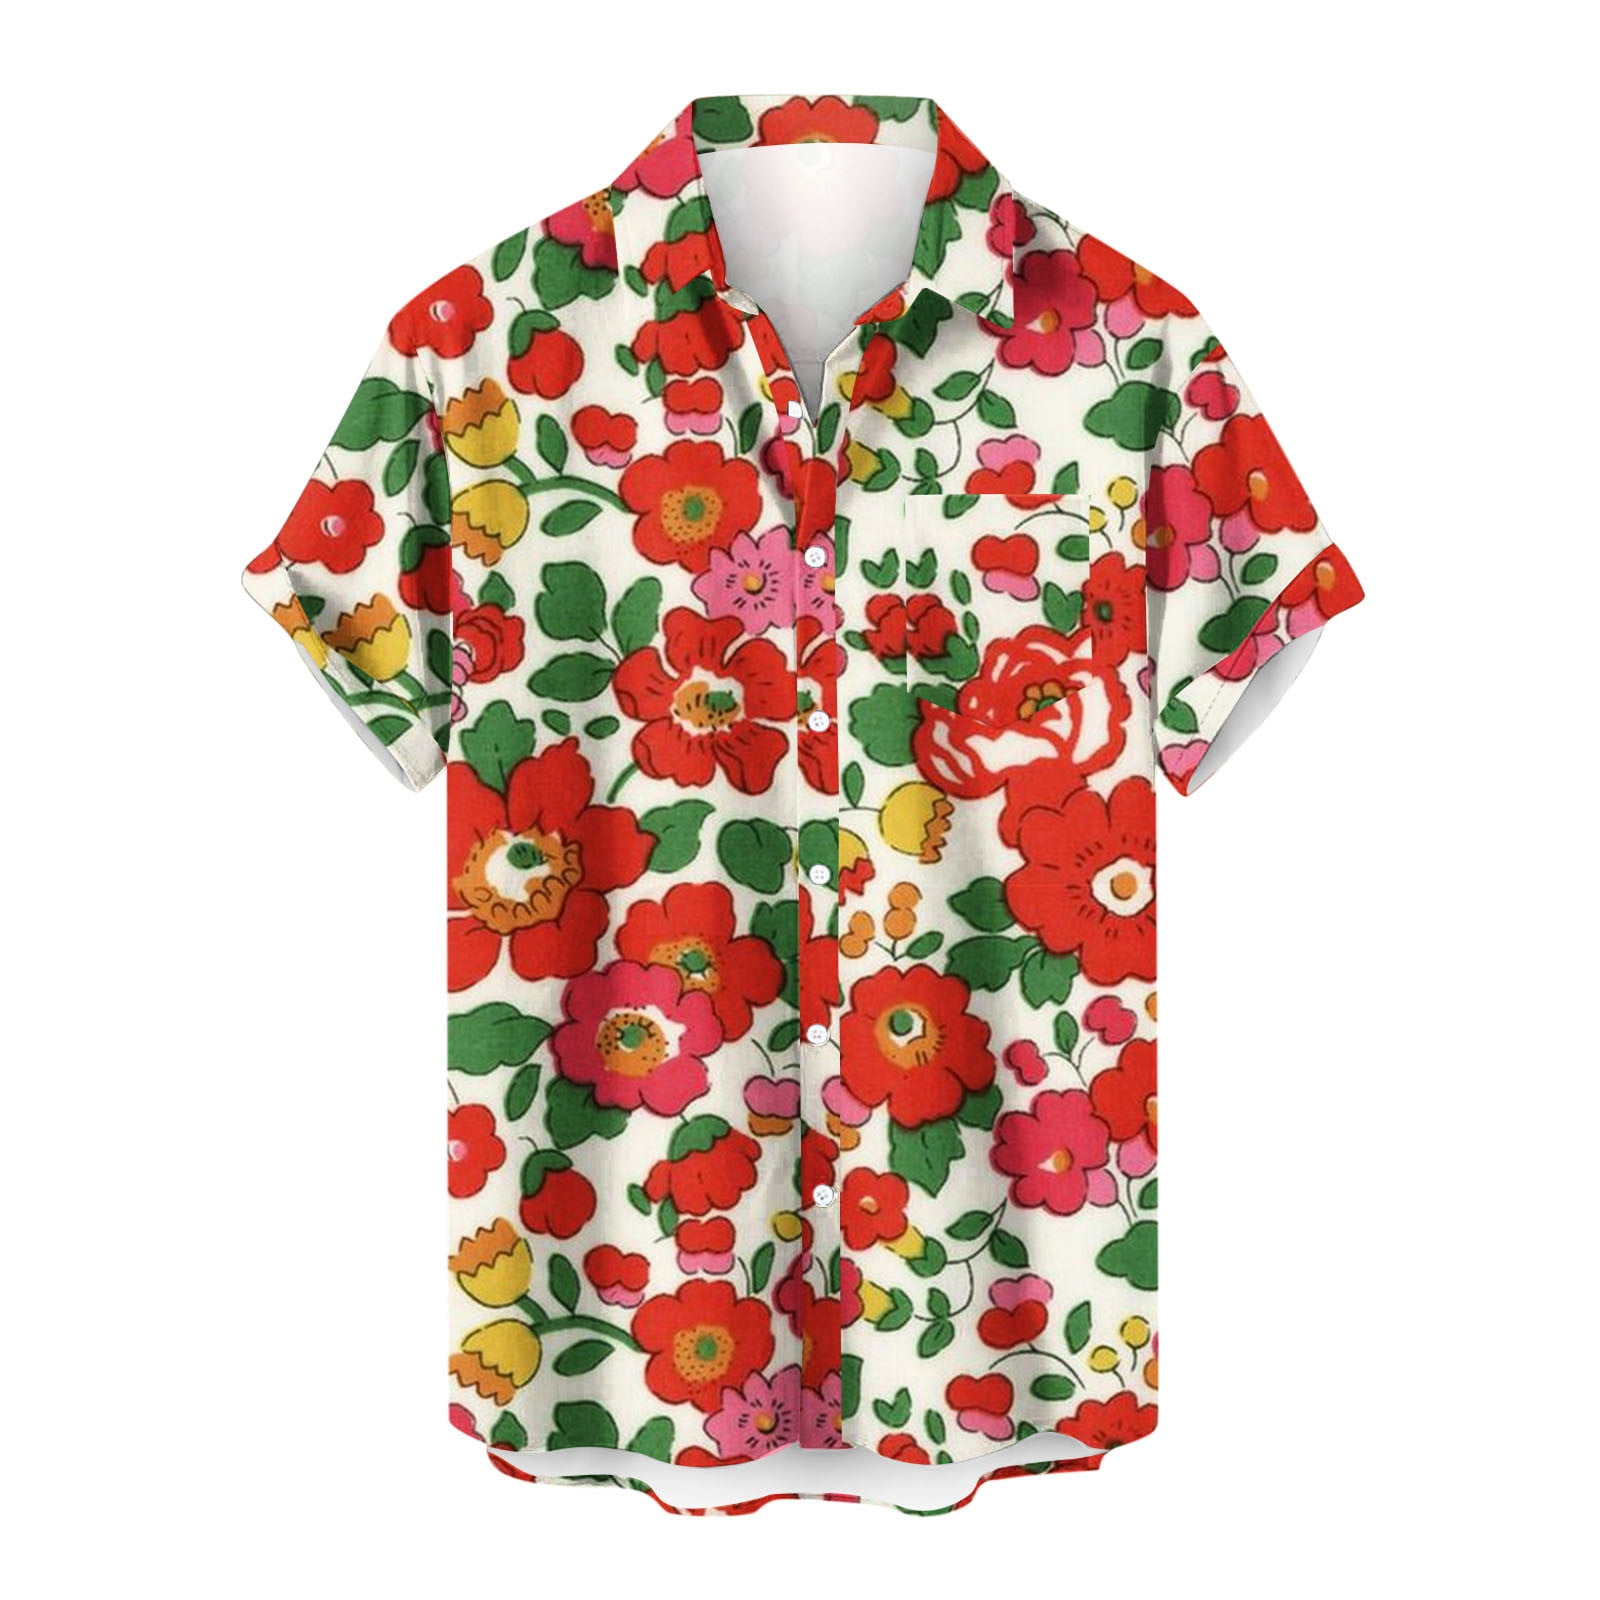 ZCFZJW Hawaiian Floral Print T-Shirts for Men Casual Button Down Short  Sleeve Tropical Tops Summer Beach Tshirt Loose Regular Fit Shirt with  Pockets